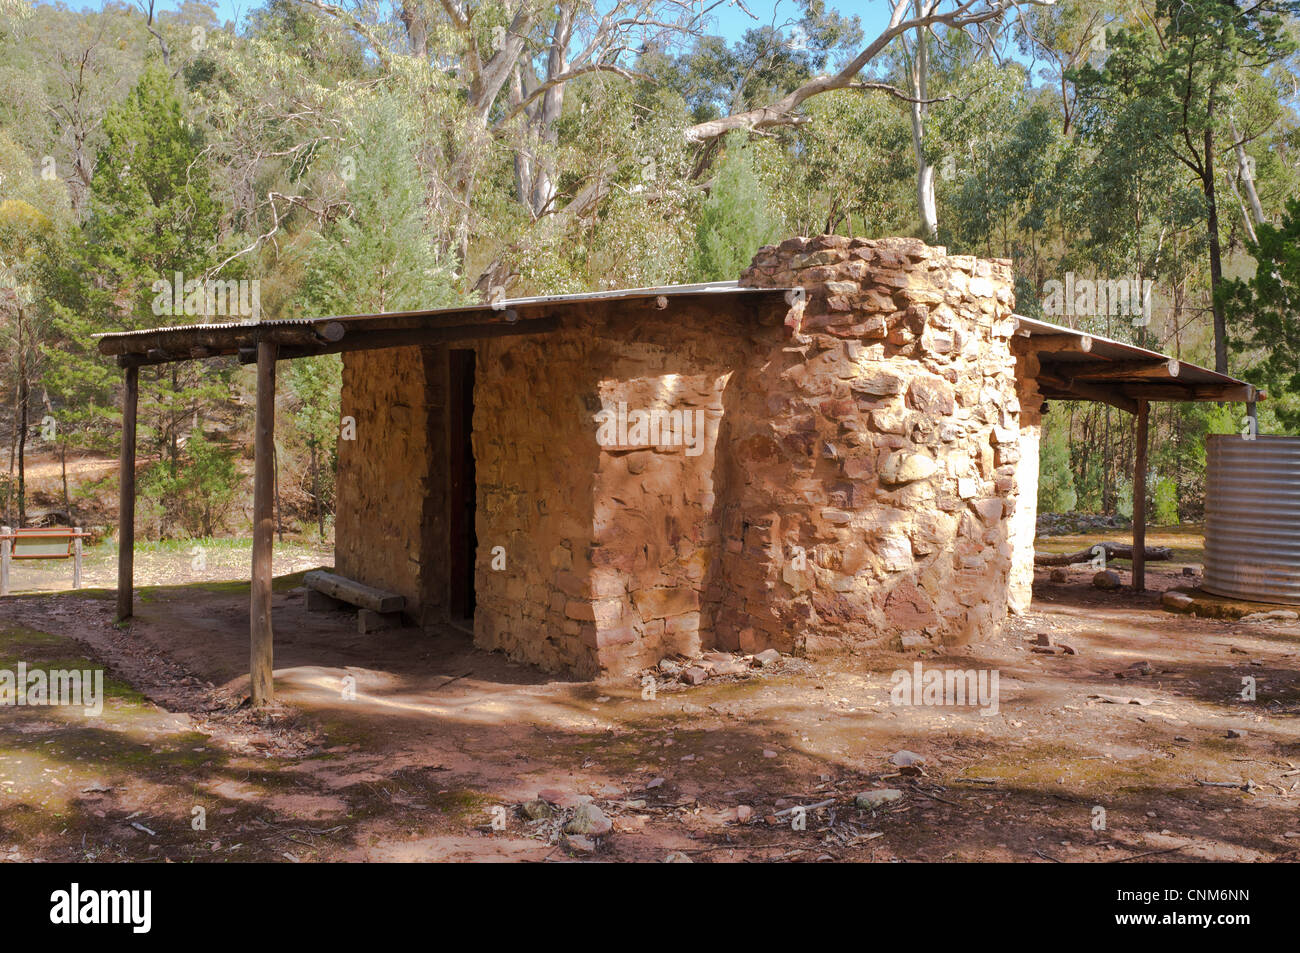 Restored Scarfes Hut, an old shepherd's hut at Mambray Creek in Mount Remarkable National Park in the Southern Flinders Ranges in South Australia Stock Photo